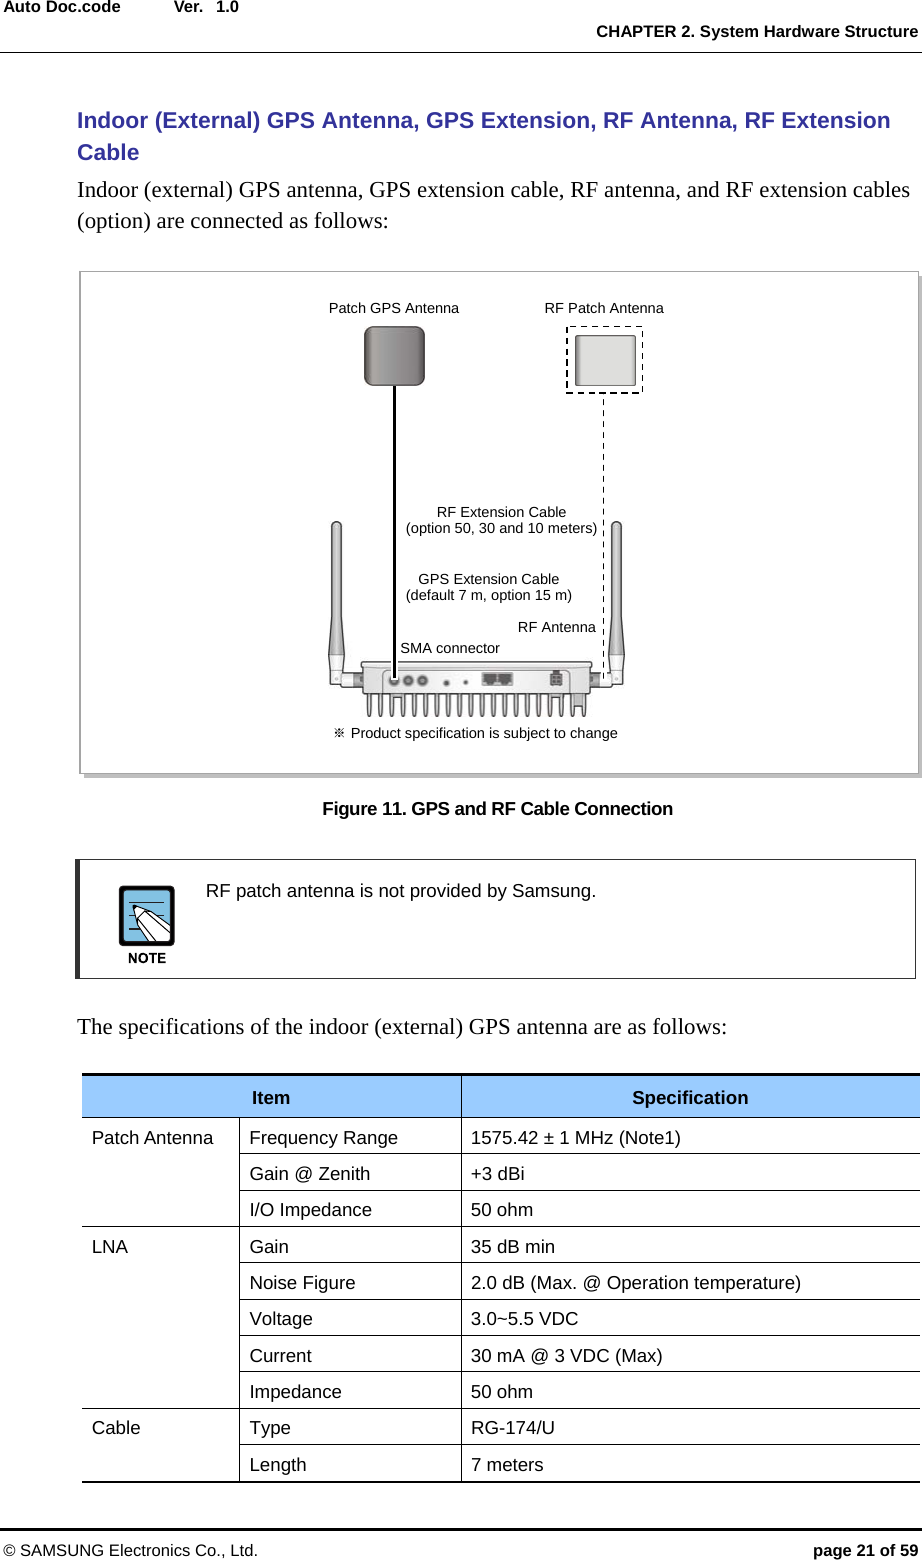  Ver.  CHAPTER 2. System Hardware Structure © SAMSUNG Electronics Co., Ltd.  page 21 of 59 Auto Doc.code  1.0 Indoor (External) GPS Antenna, GPS Extension, RF Antenna, RF Extension Cable Indoor (external) GPS antenna, GPS extension cable, RF antenna, and RF extension cables (option) are connected as follows:  Figure 11. GPS and RF Cable Connection   RF patch antenna is not provided by Samsung.    The specifications of the indoor (external) GPS antenna are as follows:  Item  Specification Patch Antenna  Frequency Range  1575.42 ± 1 MHz (Note1) Gain @ Zenith  +3 dBi I/O Impedance  50 ohm LNA  Gain  35 dB min Noise Figure  2.0 dB (Max. @ Operation temperature) Voltage 3.0~5.5 VDC Current  30 mA @ 3 VDC (Max) Impedance 50 ohm Cable Type  RG-174/U Length 7 meters SMA connector RF AntennaGPS Extension Cable (default 7 m, option 15 m) RF Extension Cable   (option 50, 30 and 10 meters) ※ Product specification is subject to change Patch GPS Antenna  RF Patch Antenna 